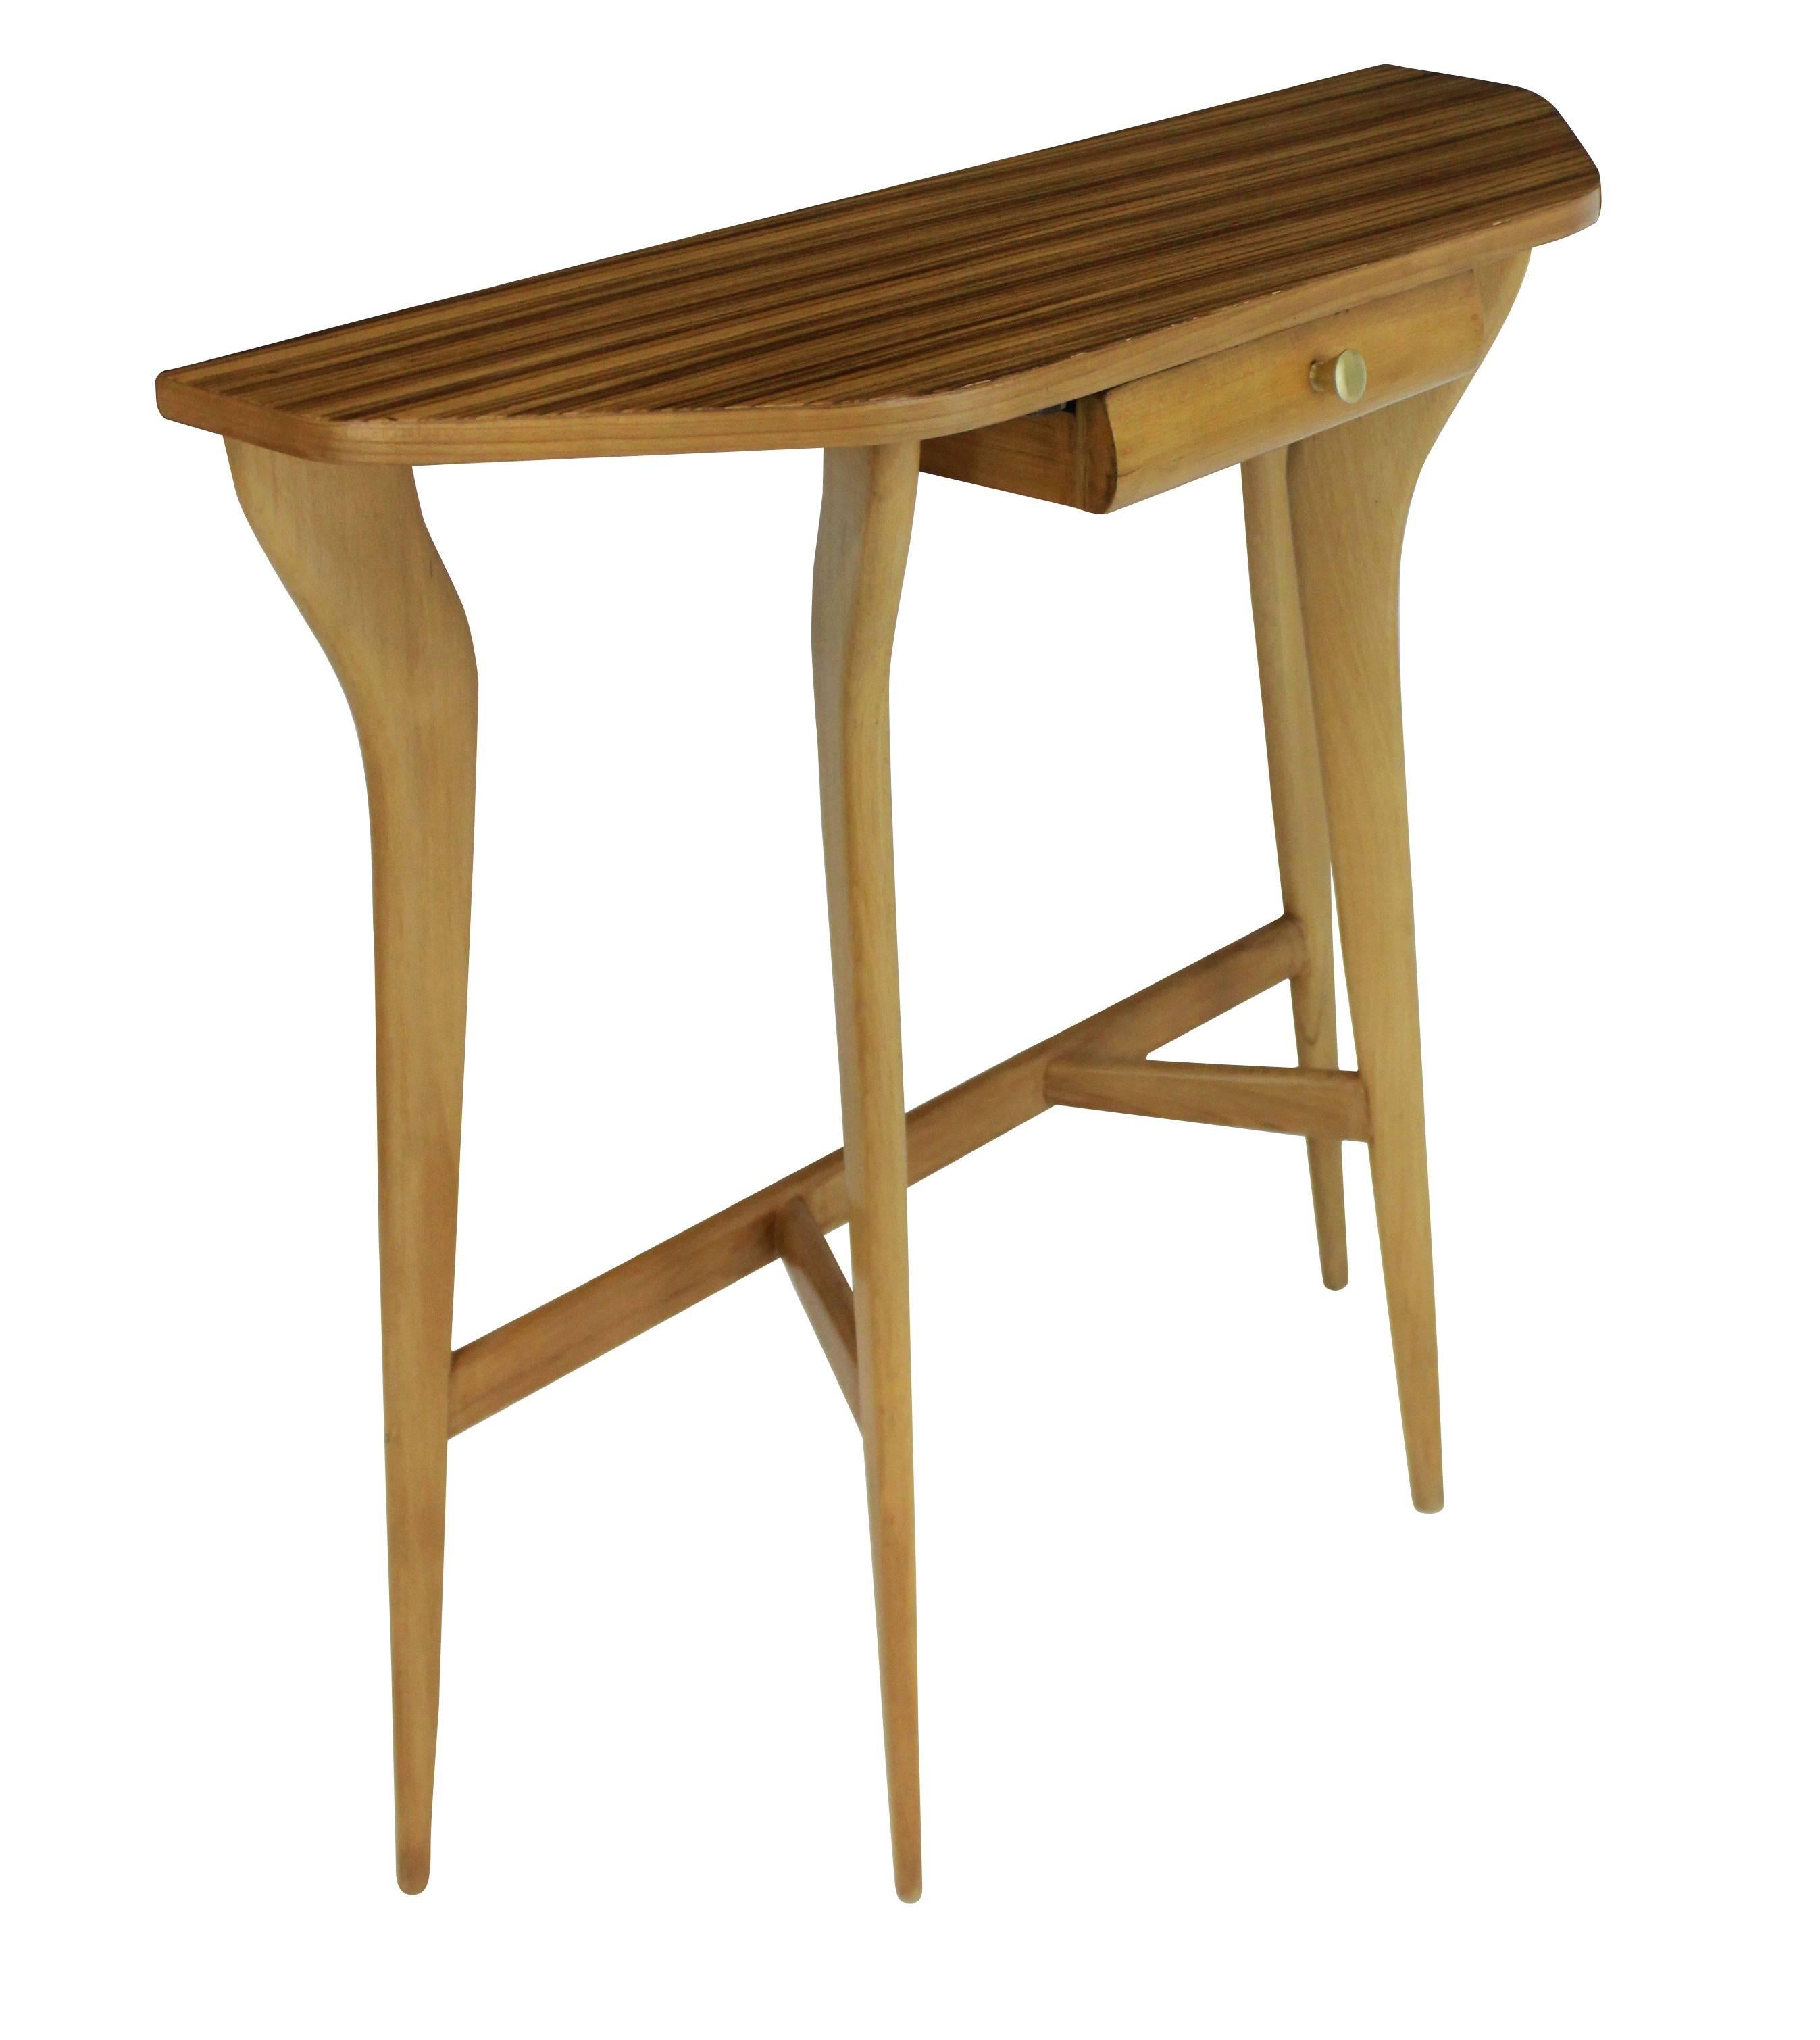 An Italian console table of architectural design in pale wood, with a bleached palisander top.
   